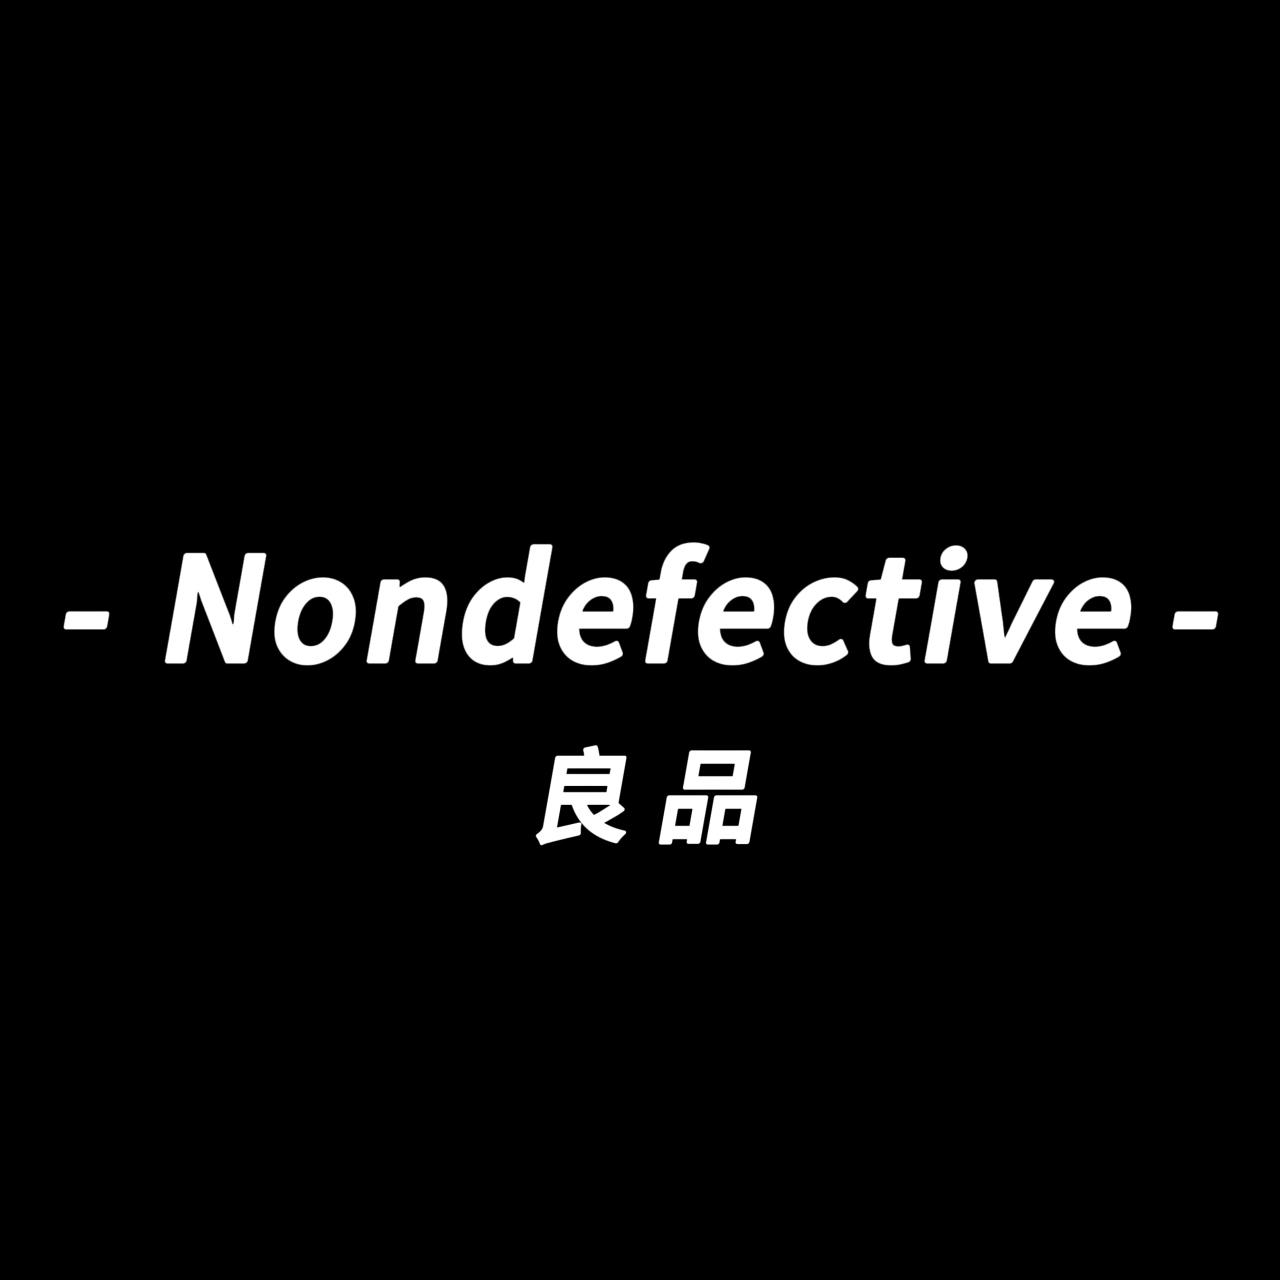 Nondefective's images